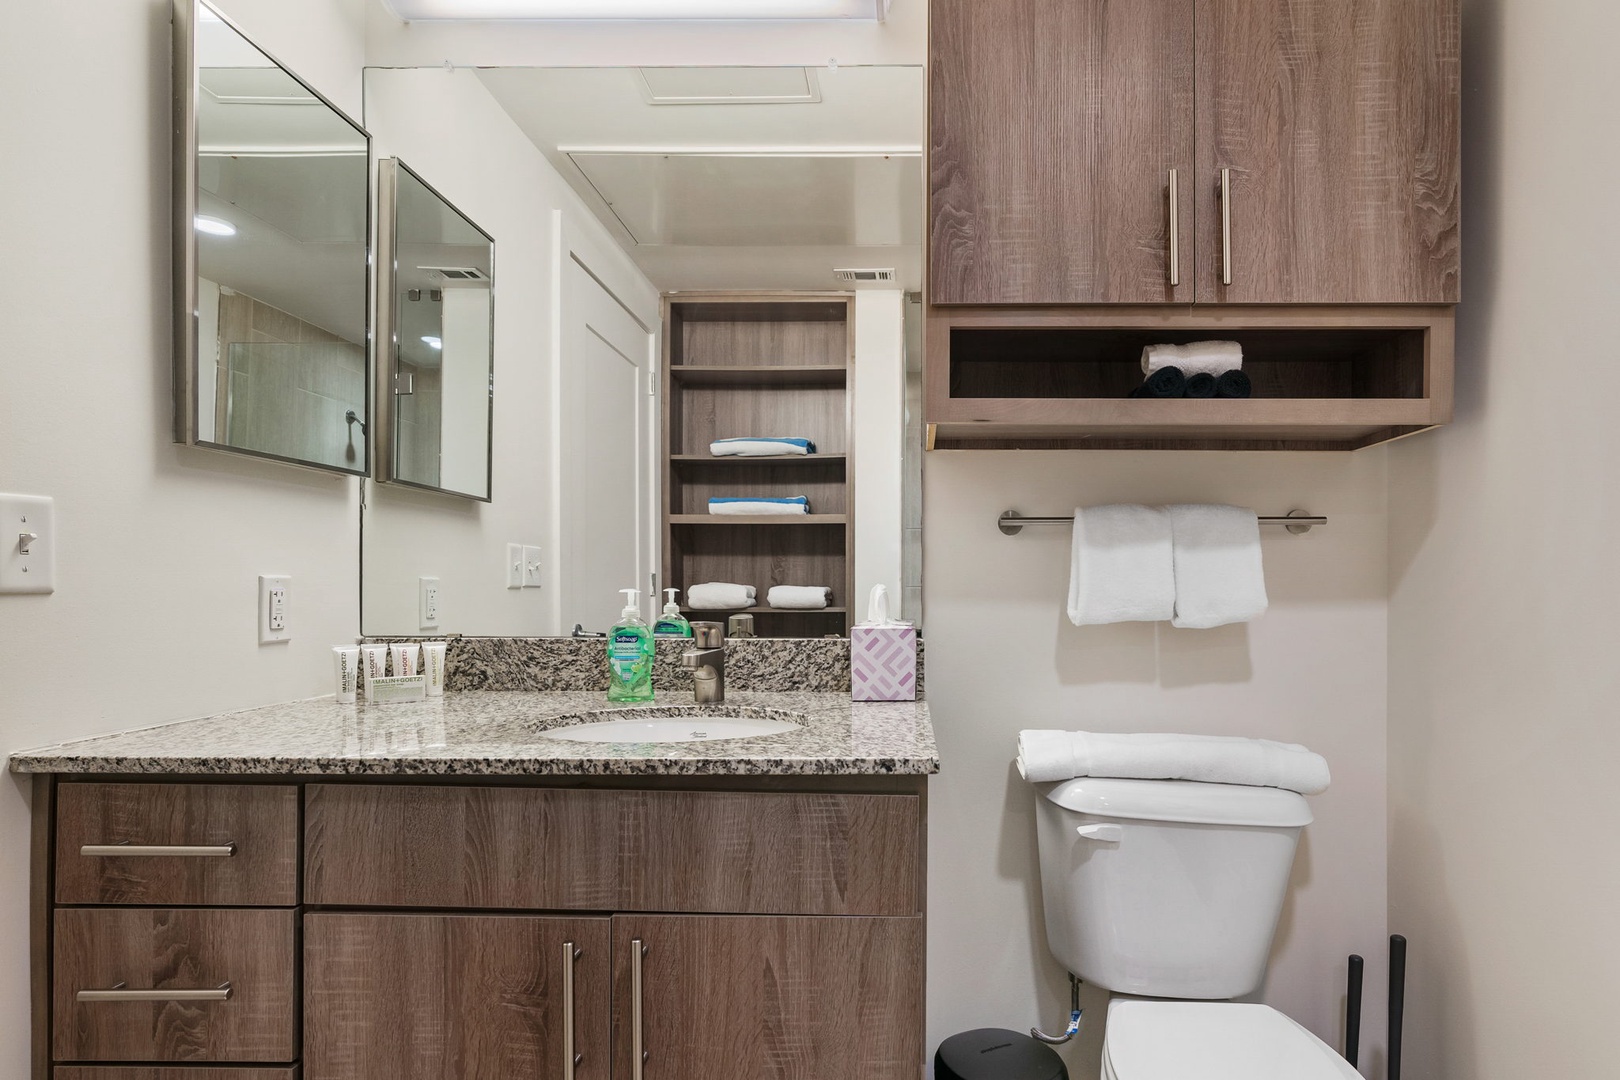 Begin your day in the stylish bathroom with complimentary toiletries.